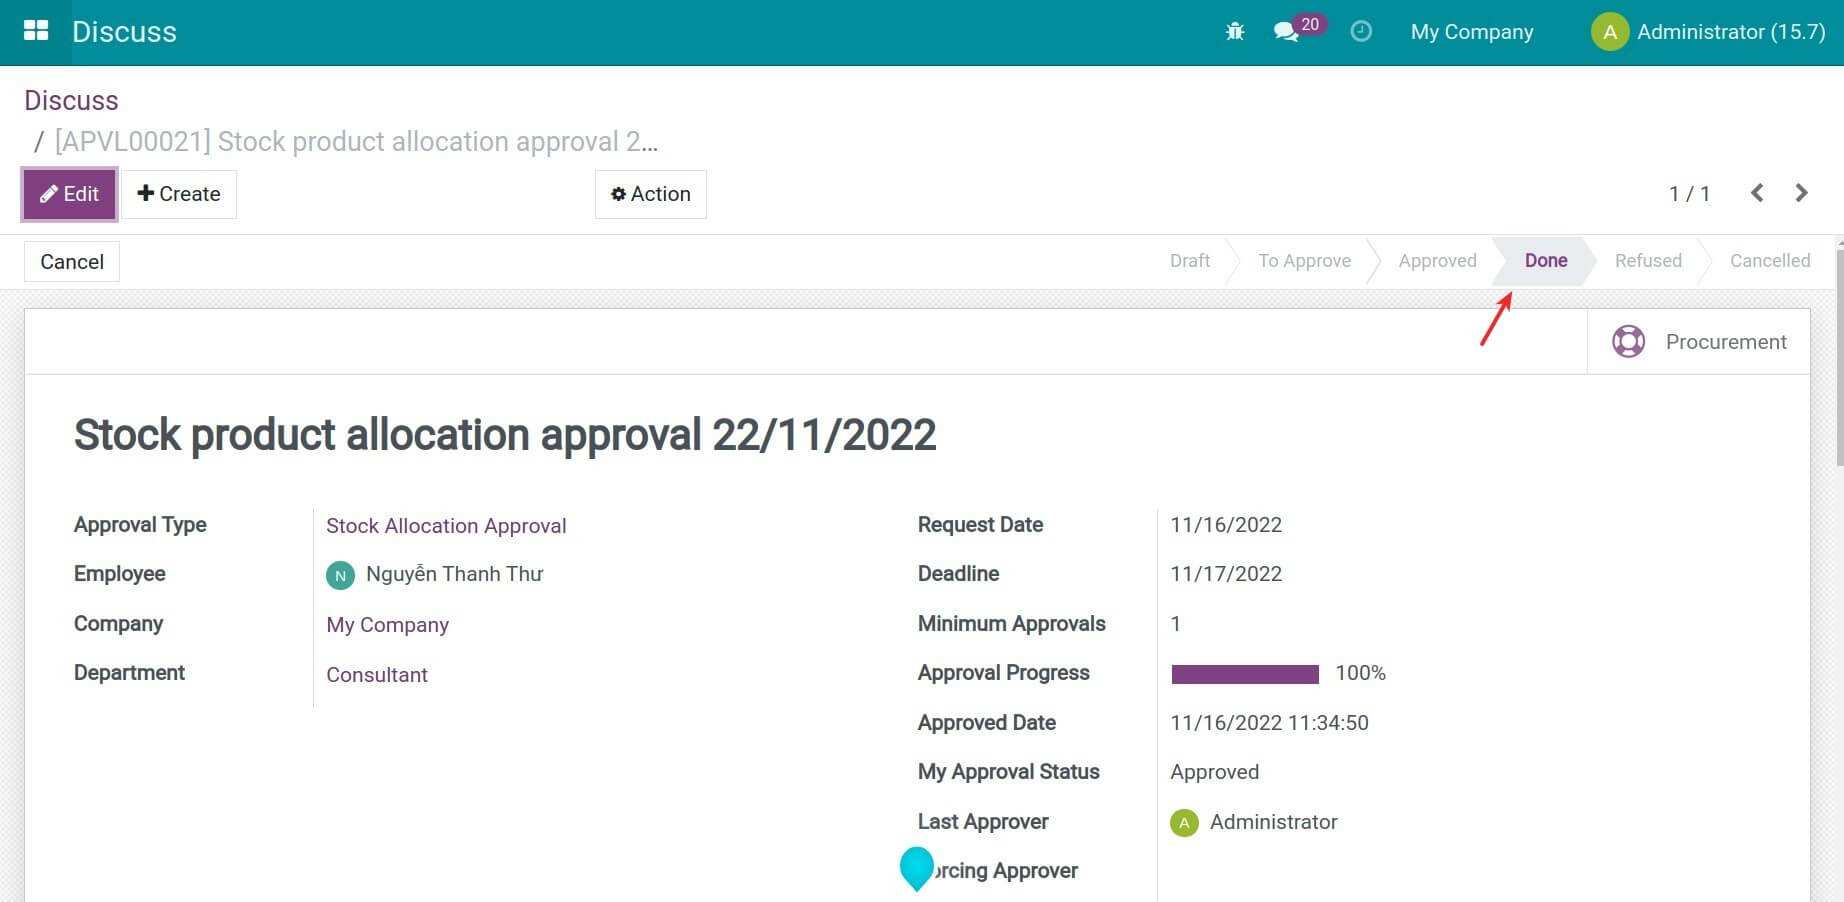 Completed approval process